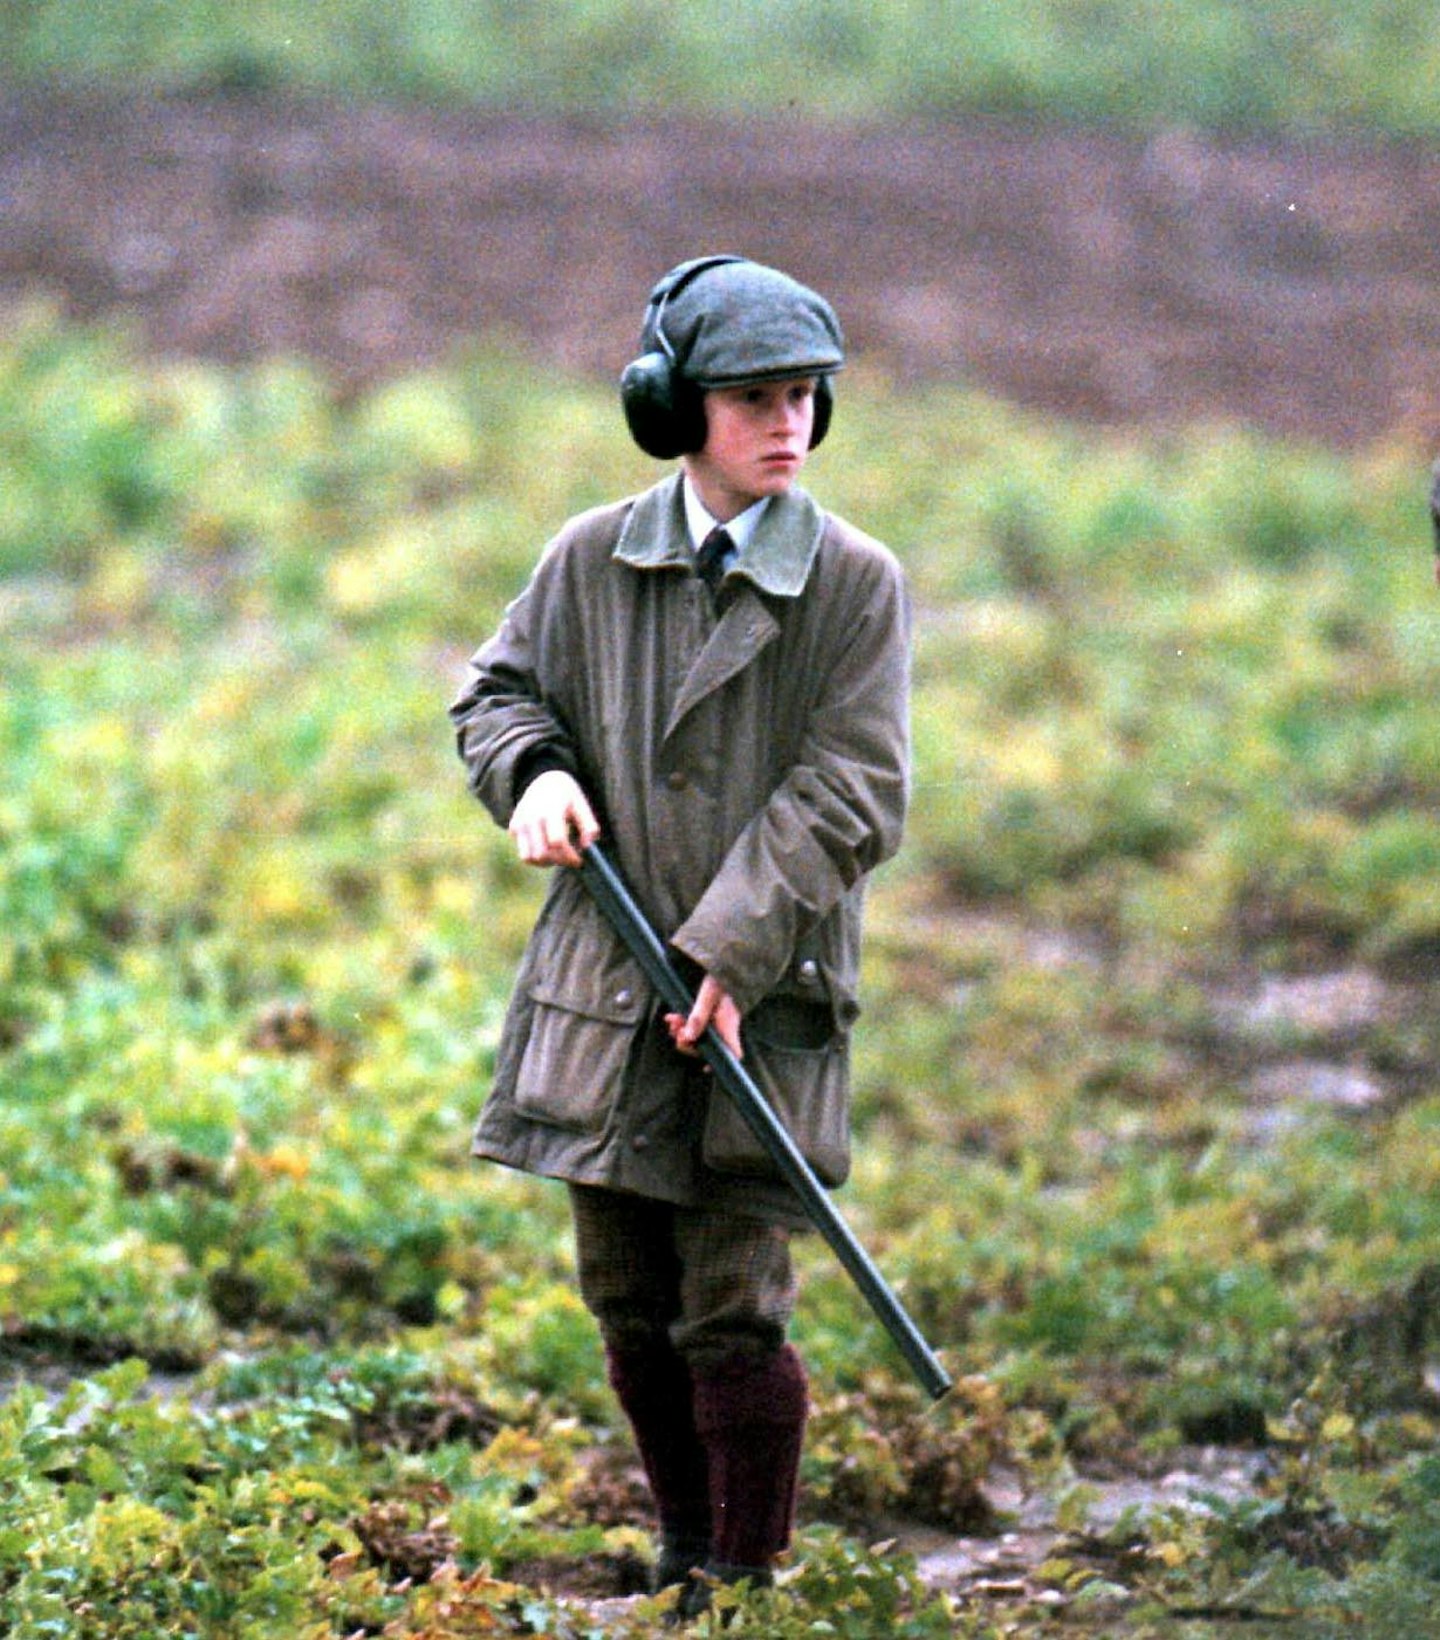 Prince Harry used to go hunting with his father and brother when he was younger